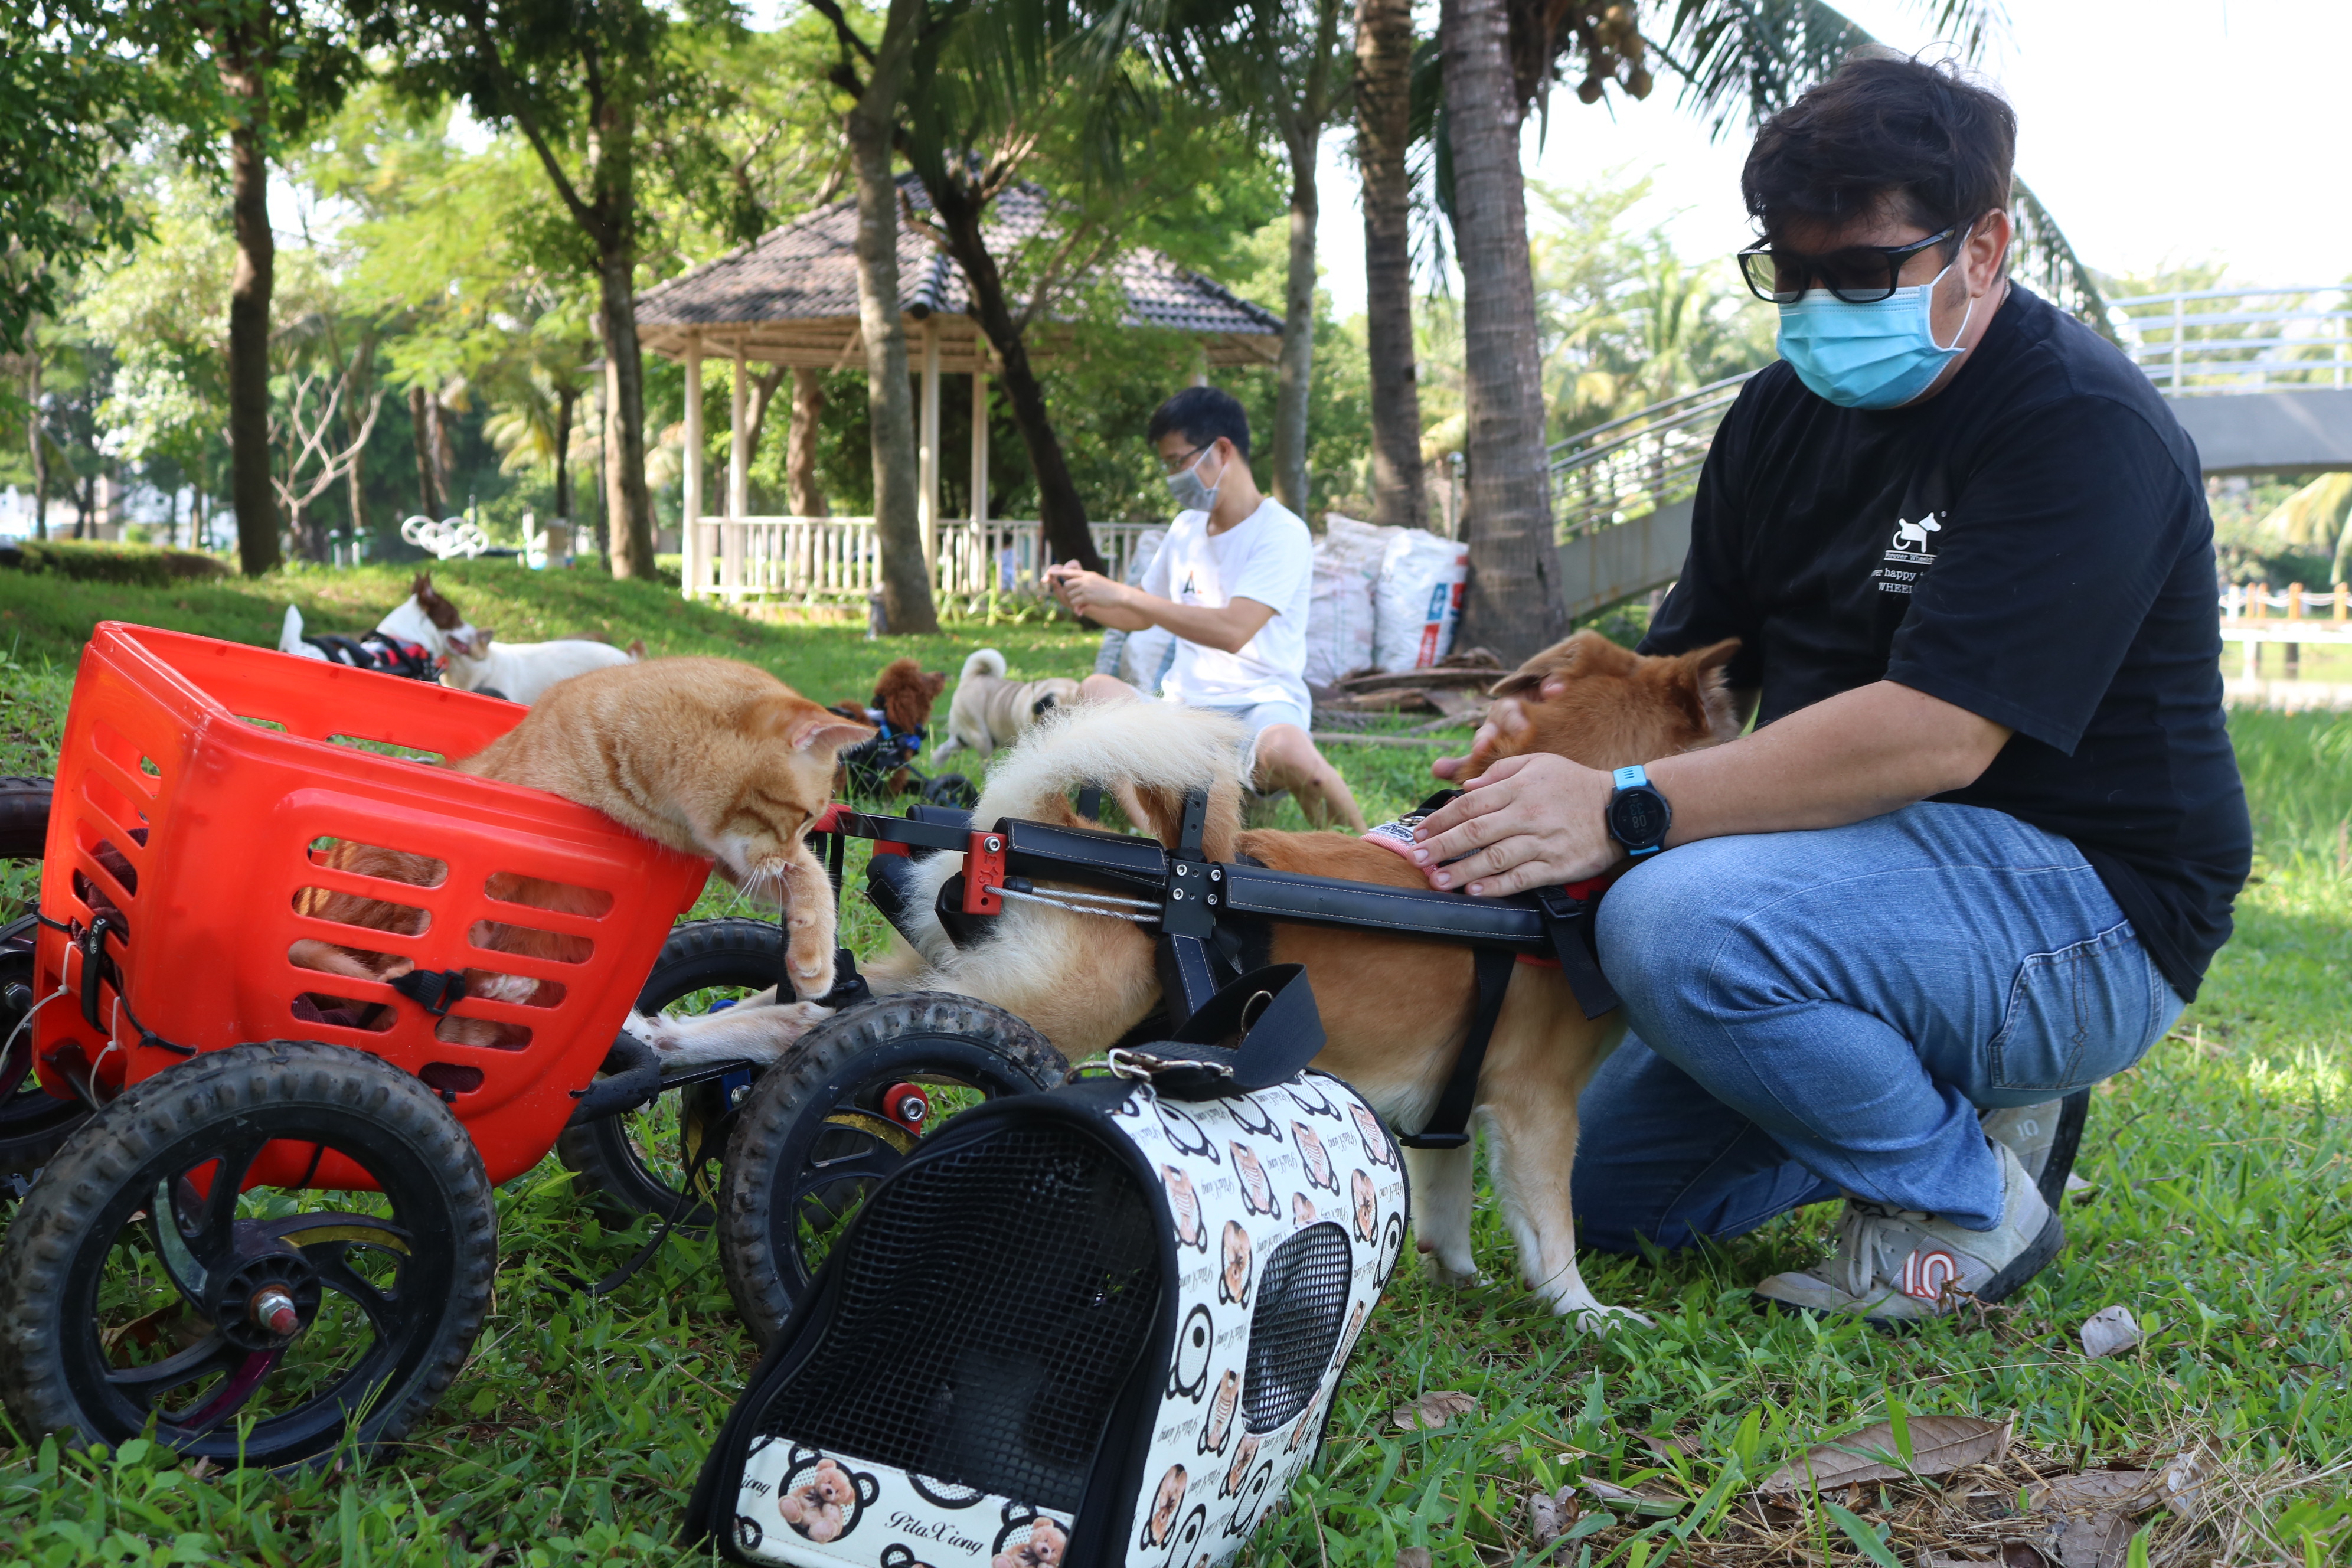 Oscar Fernando Ruiz Bonilla plays with his pets at a park near his house in Ho Chi Minh City’s District 9 on October 19, 2021. Photo: Hoang An / Tuoi Tre